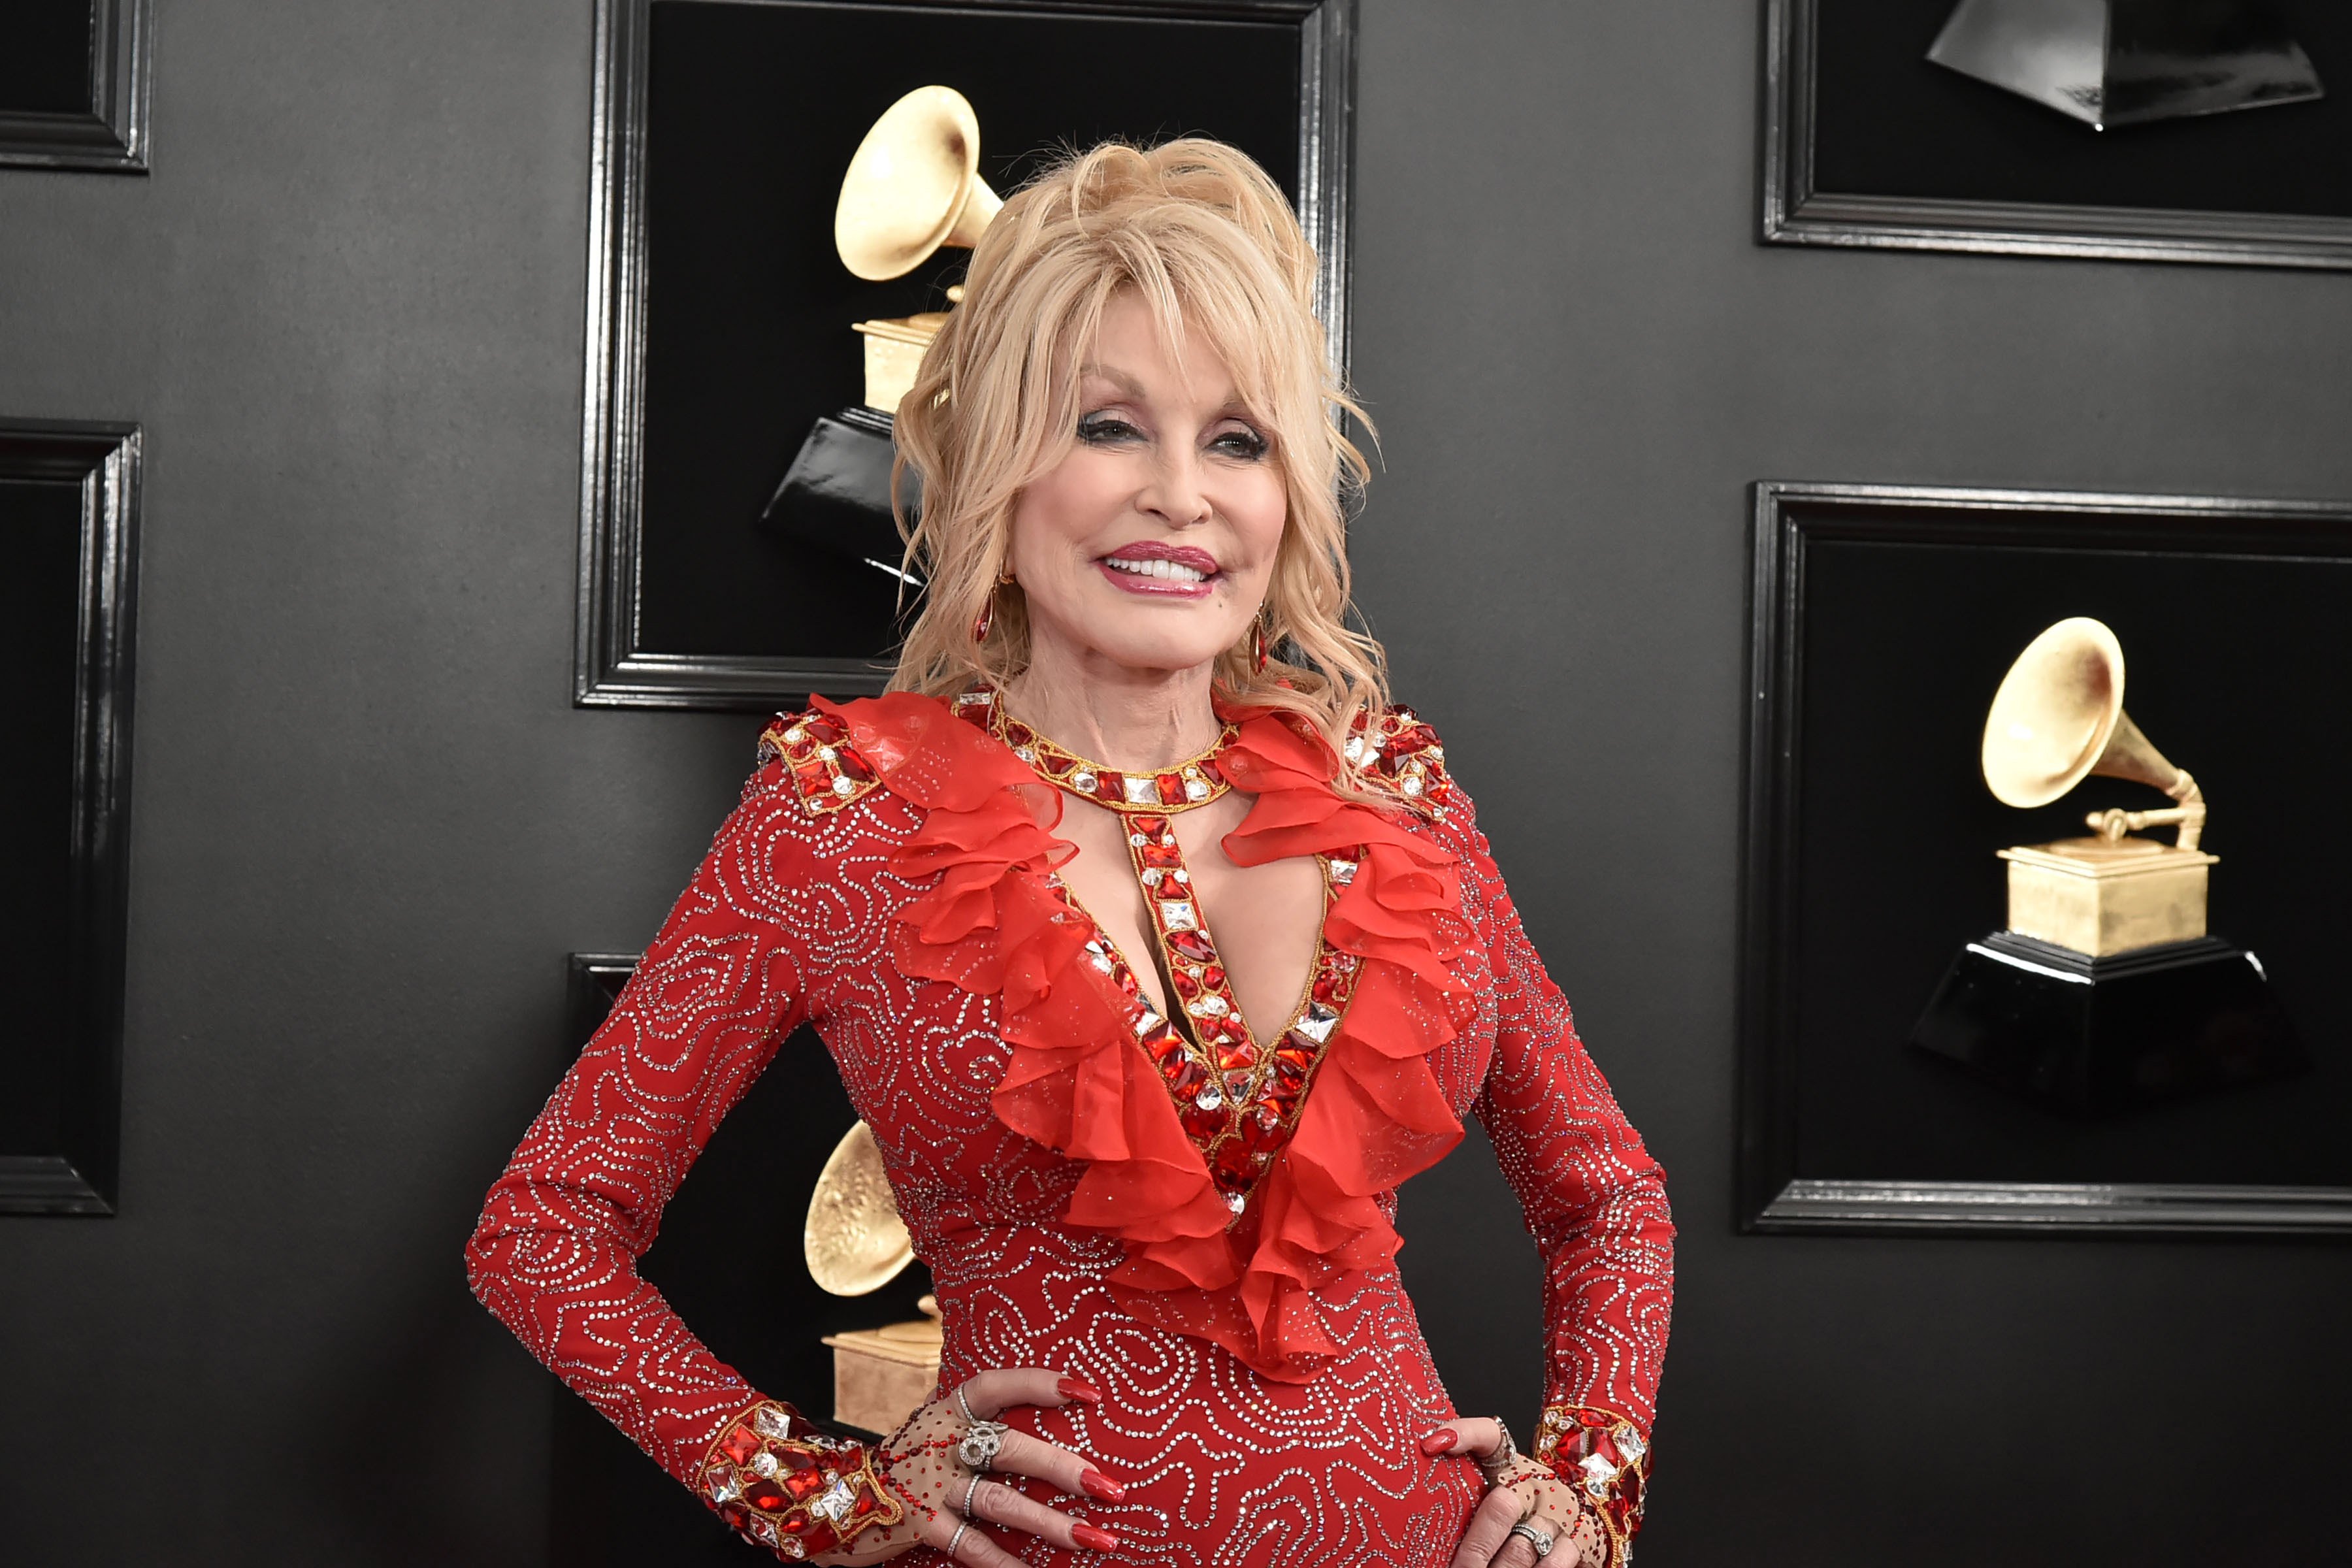 Dolly Parton smiles on the Grammy Awards red carpet in a red dress.